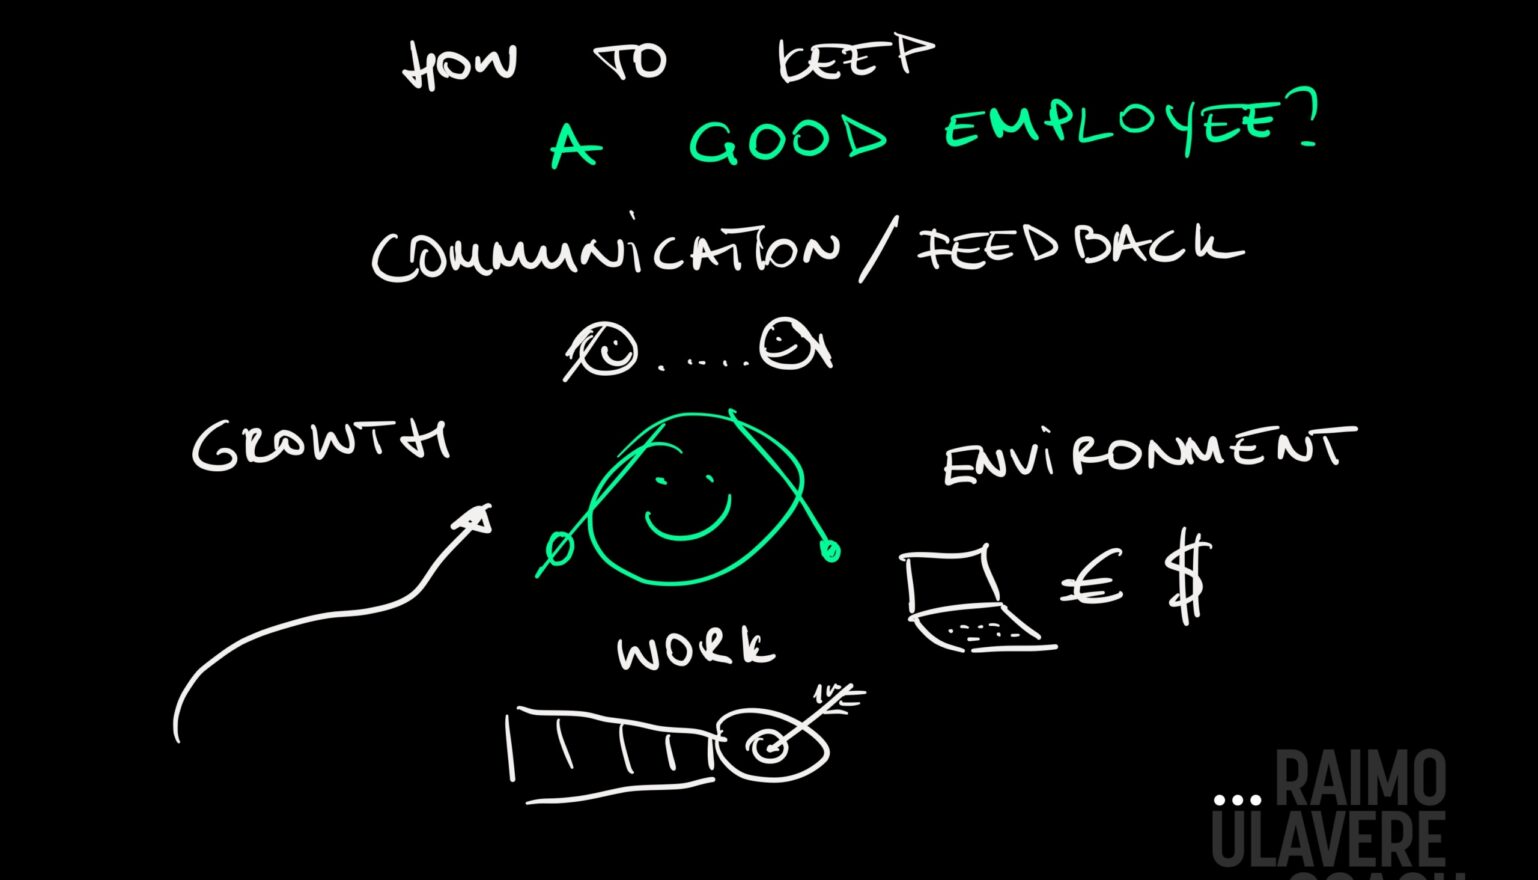 How to keep a good employee – your greatest asset?